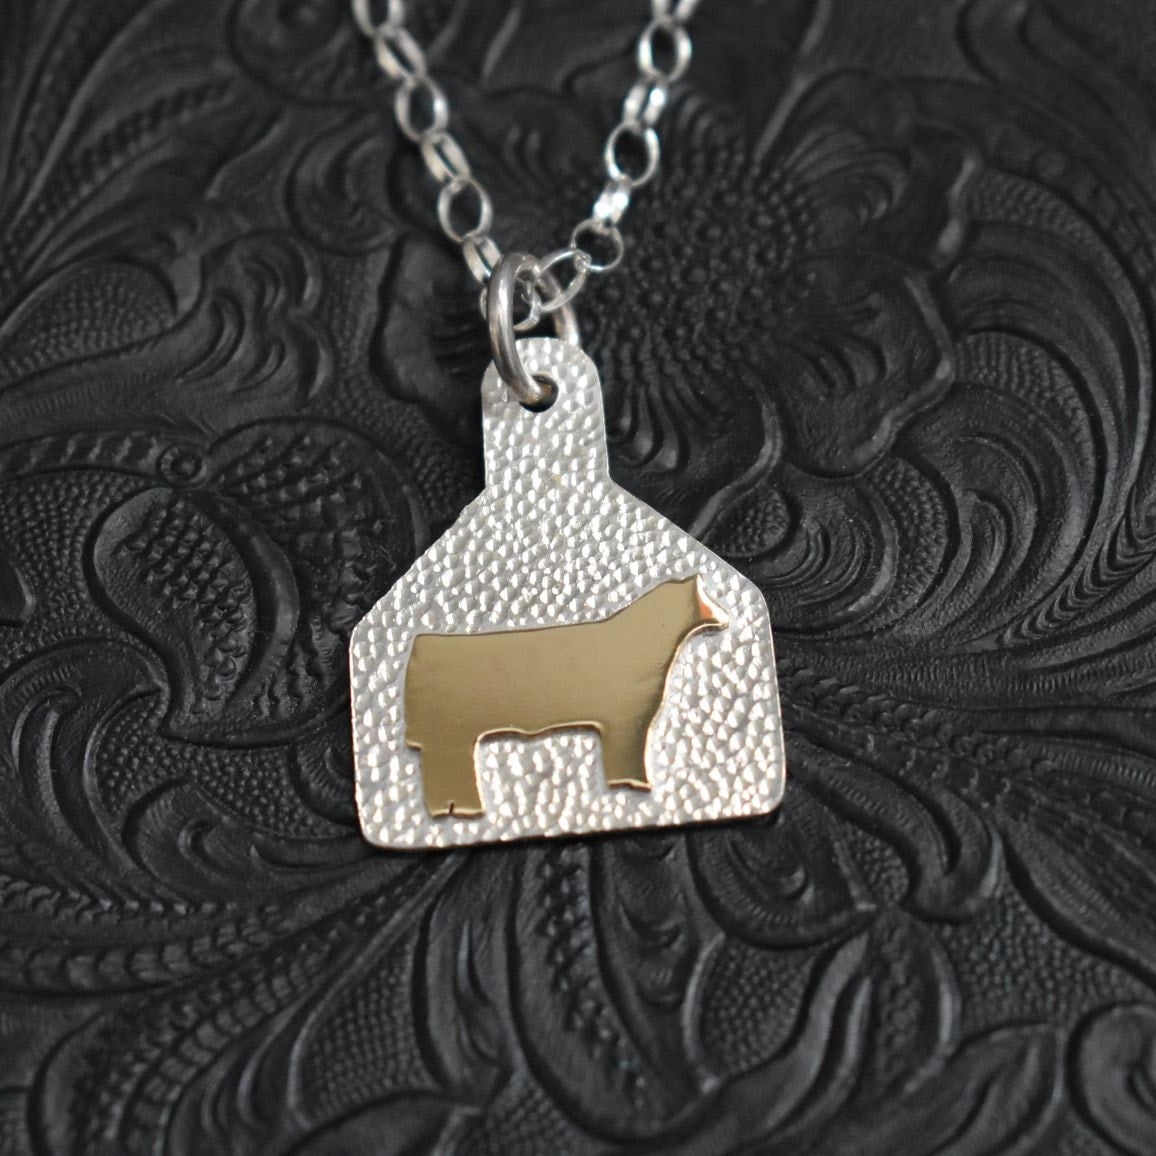 Animal Ear Tag Message Necklace - DirtySnouts